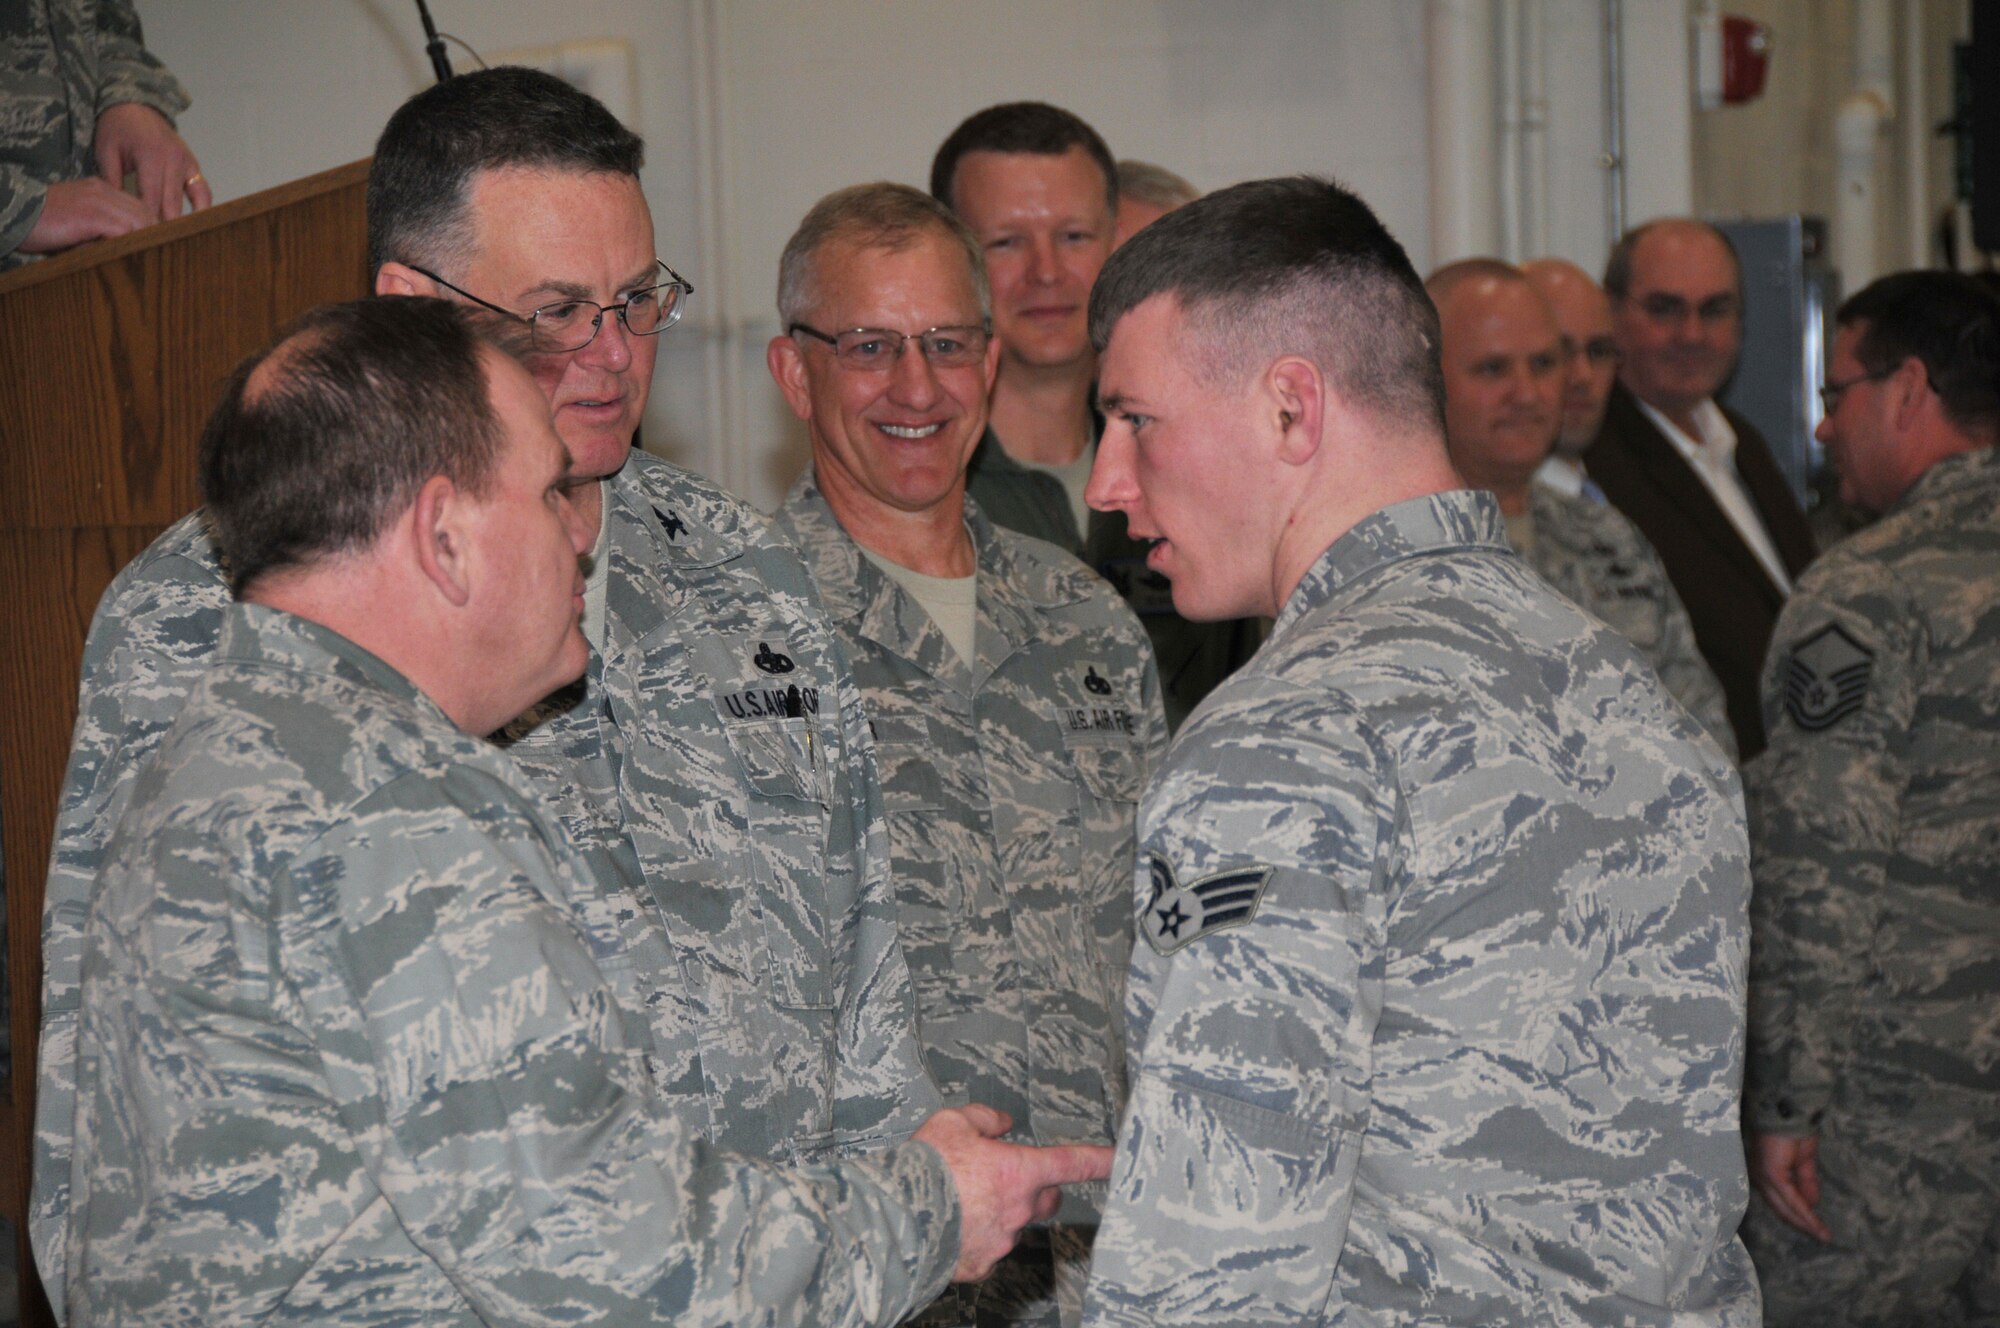 Col. Brian Miller, commander of the 185th Air Refueling Wing, welcomes home Senior Airman Darwin Kluender from his recent deployment during the 185th welcome home ceremony onMarch 3rd, 2012, in Sioux City, Iowa. During 2011, over 300 airmen from the 185th deployed to Iraq, Afghanistan, and numerous other locations around the globe in support of the Department of Defense contingency operations. (US Air Force Photo by TSgt Brian Cox)